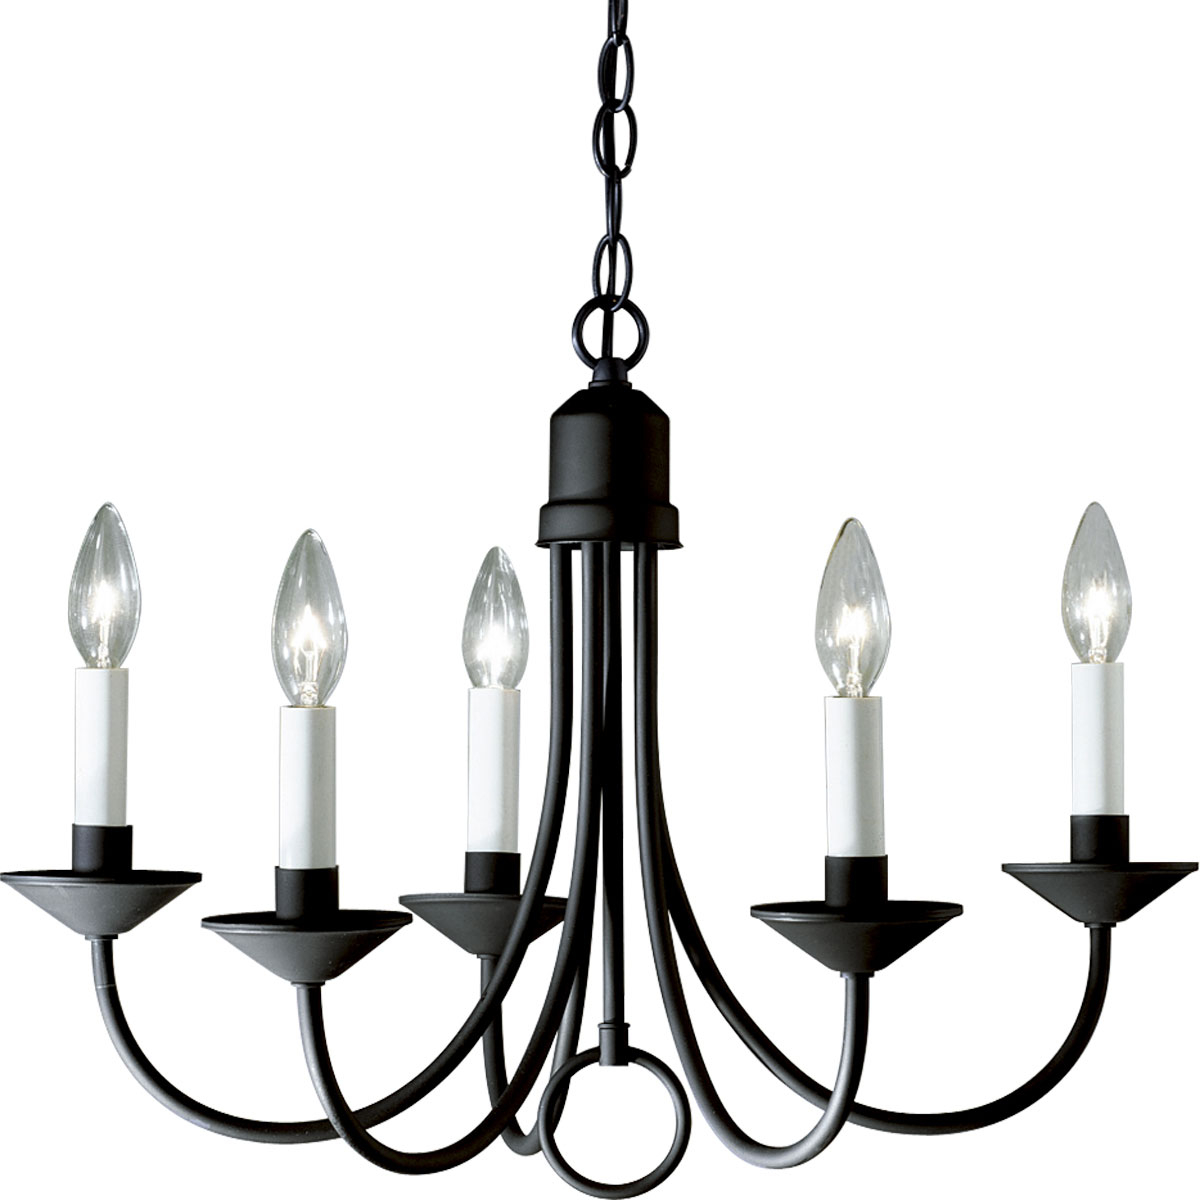 P4008-31 785247400829 This simple, classic five-light chandelier is popular in the vintage farmhouse inspired designs. White candle covers and a decorative loop detail complete the look. Black finish.